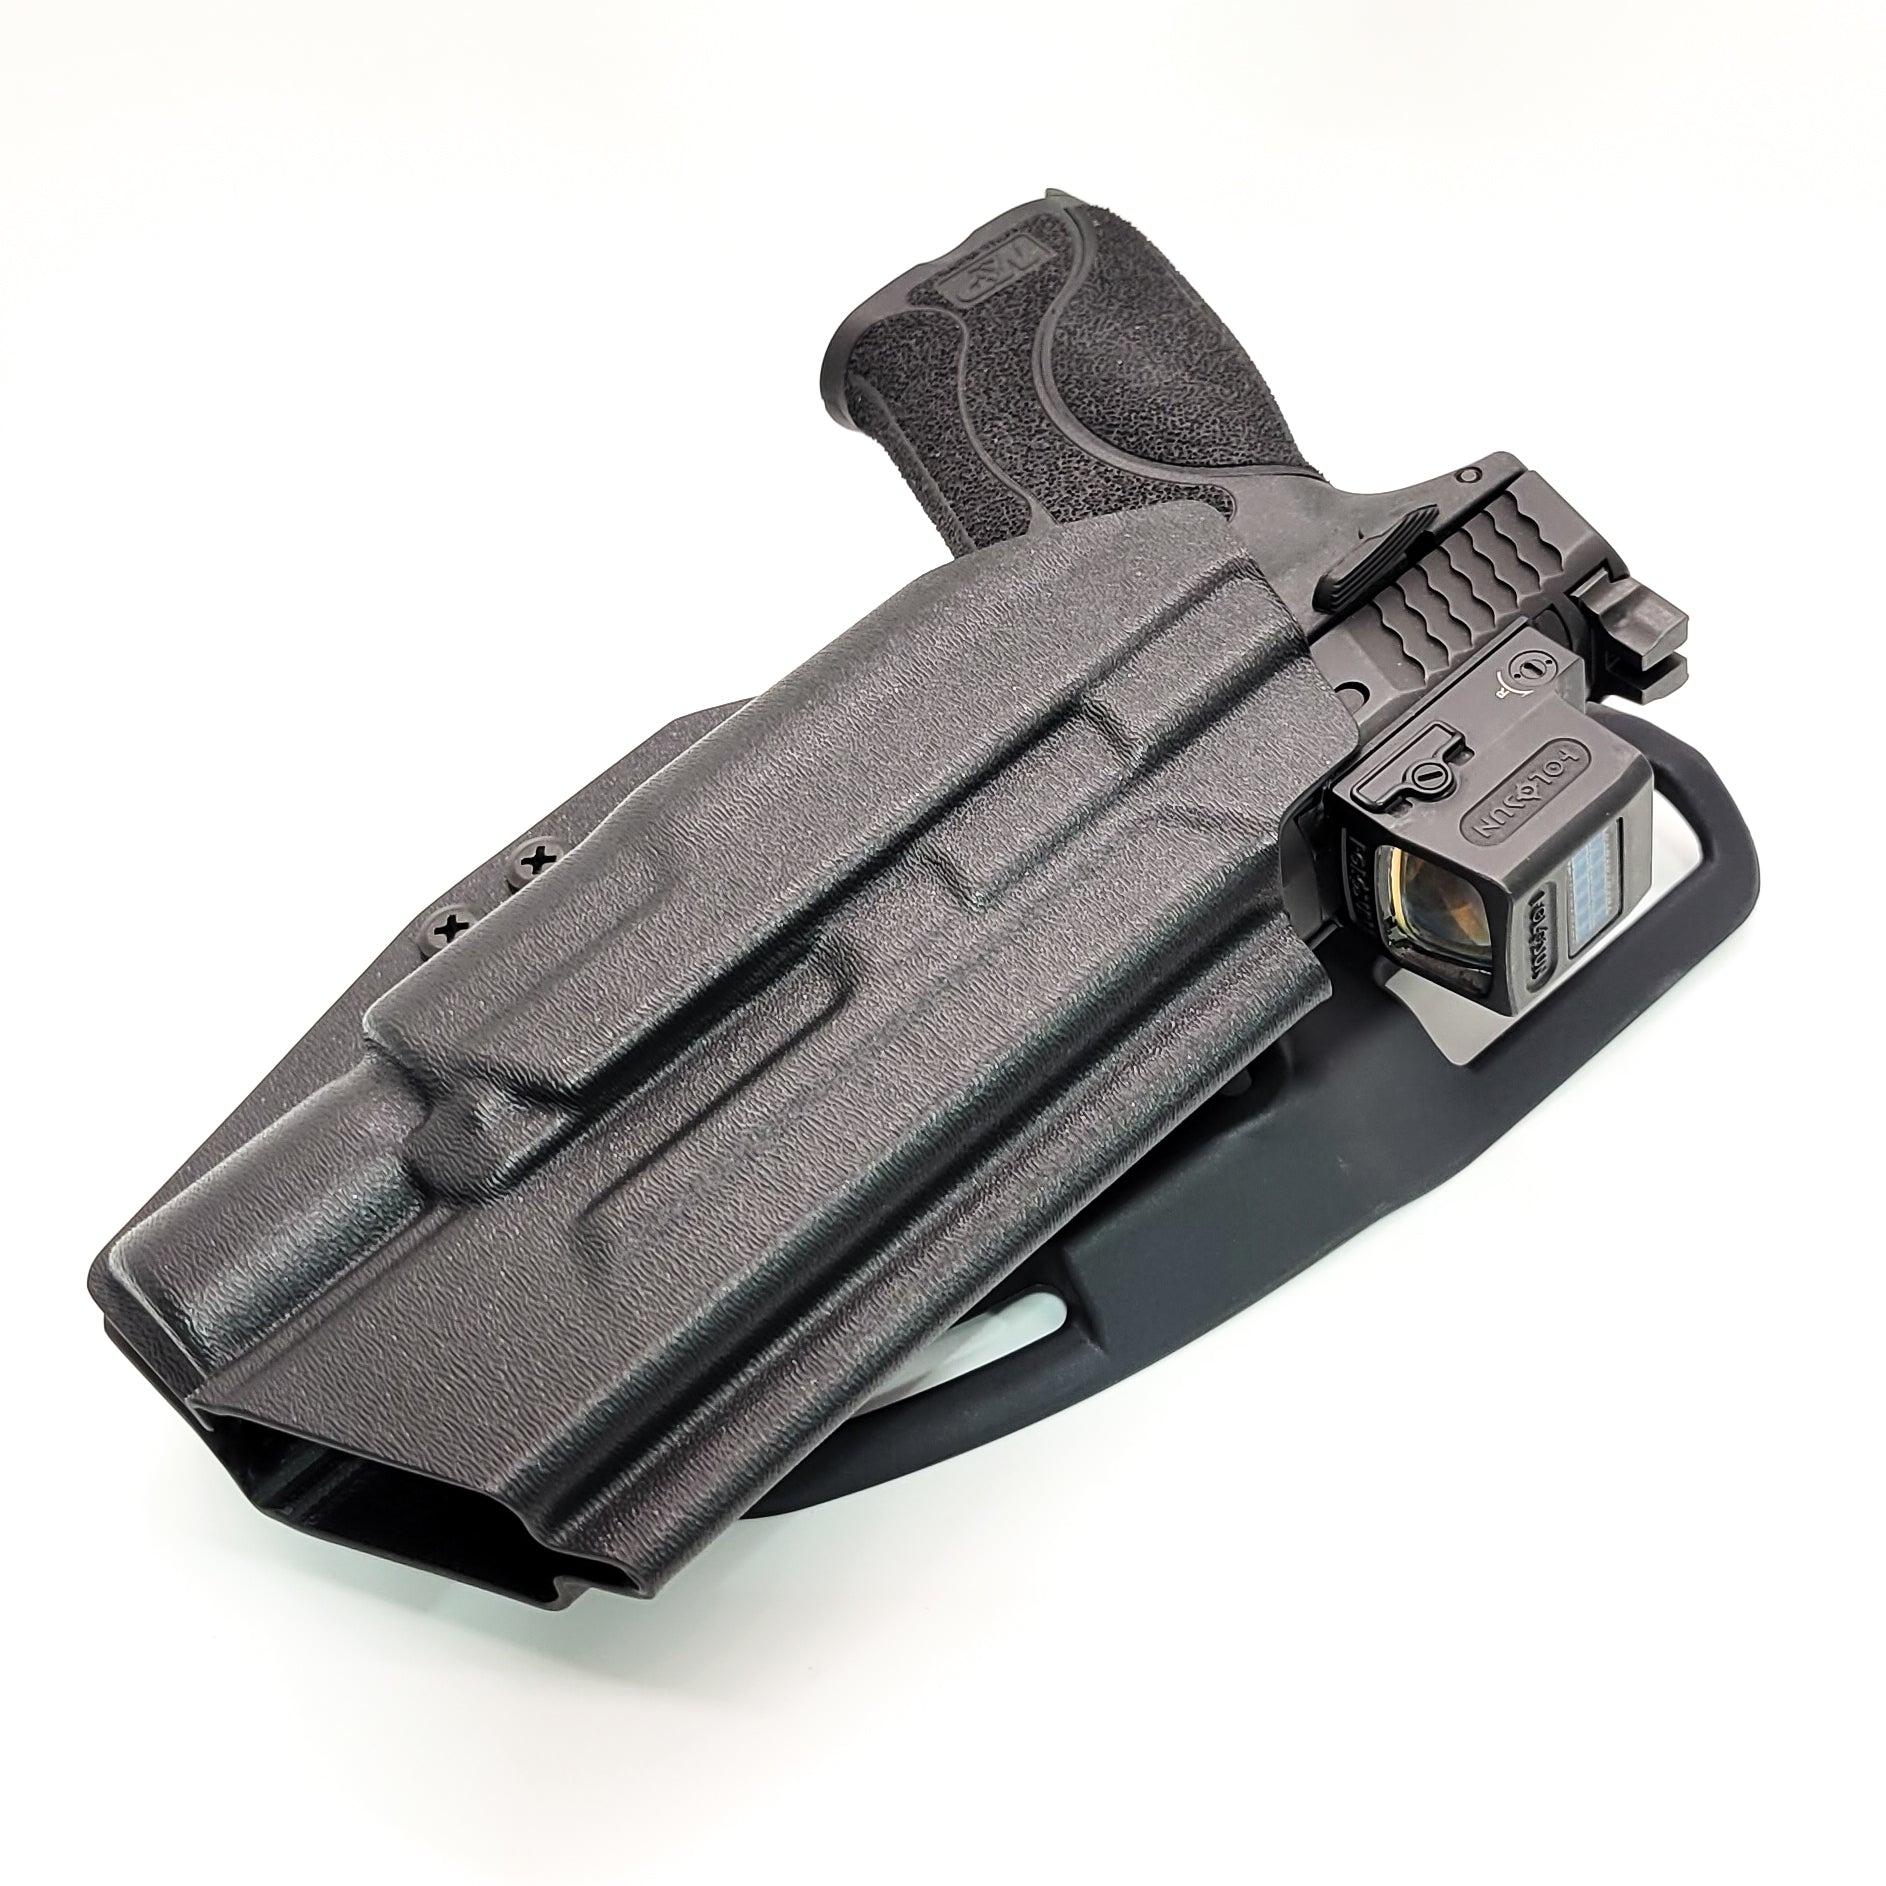 For the best Outside Waistband Duty & Competition OWB Kydex Holster designed to fit the Smith & Wesson M&P 10MM M2.0 4" or 4.6" pistol with thumb safety and Surefire X300U-A, X300U-B, X300T-A or X300T-B, shop four brothers holsters.  Full sweat guard, adjustable retention, profiled for a red dot sight. Made in the USA.